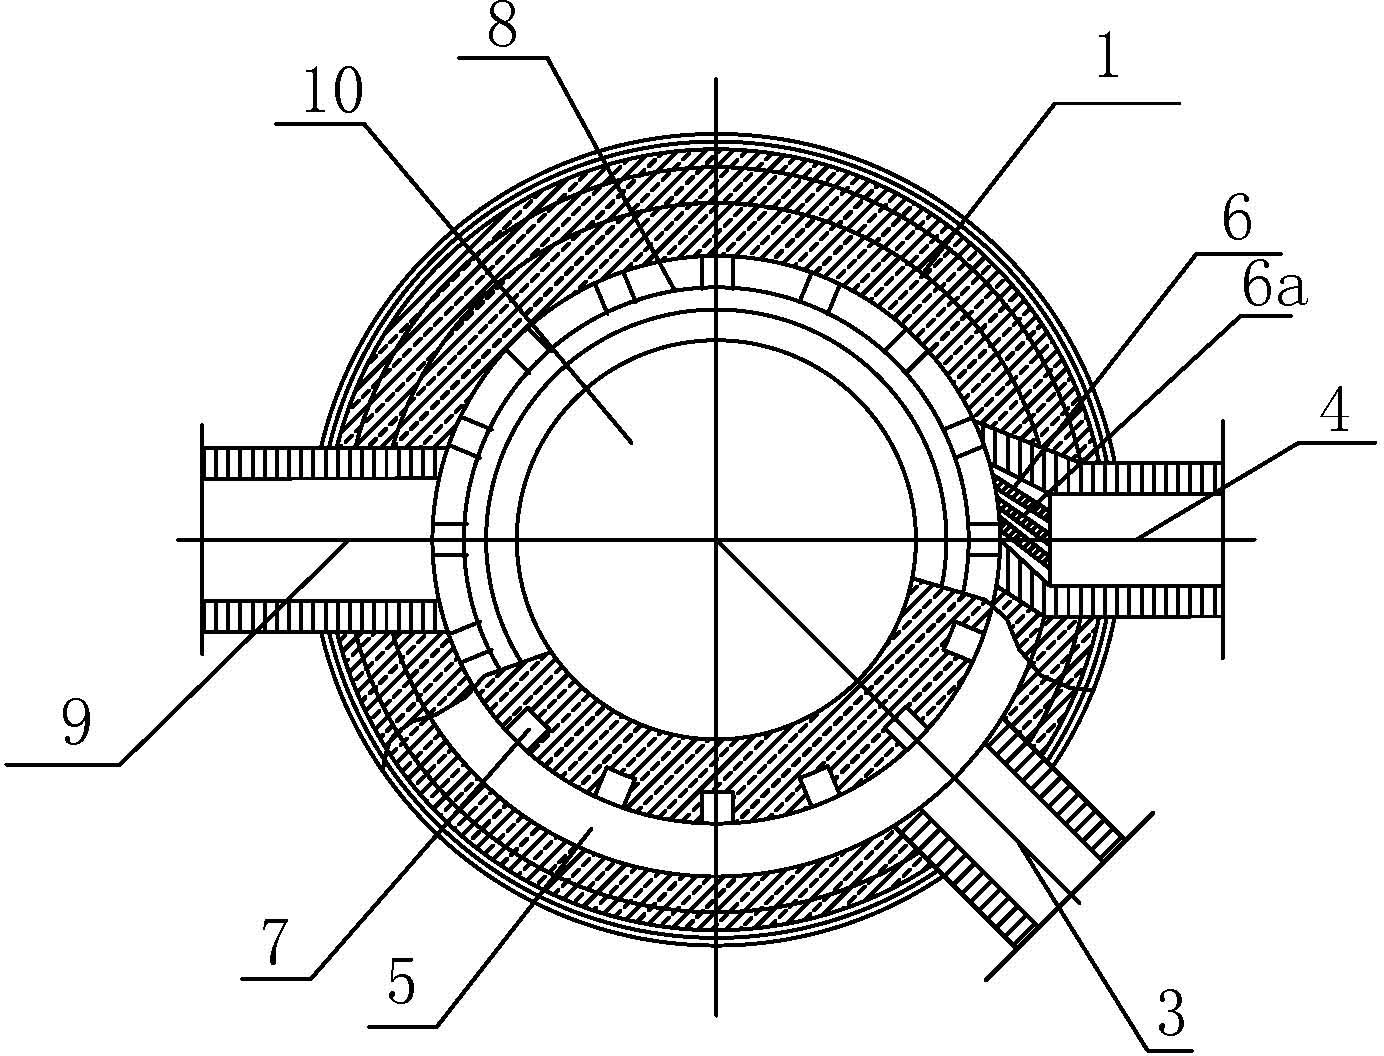 Combustion device for rotational flow mixed combustion by spraying air above uniformly distributed gas jets in loop